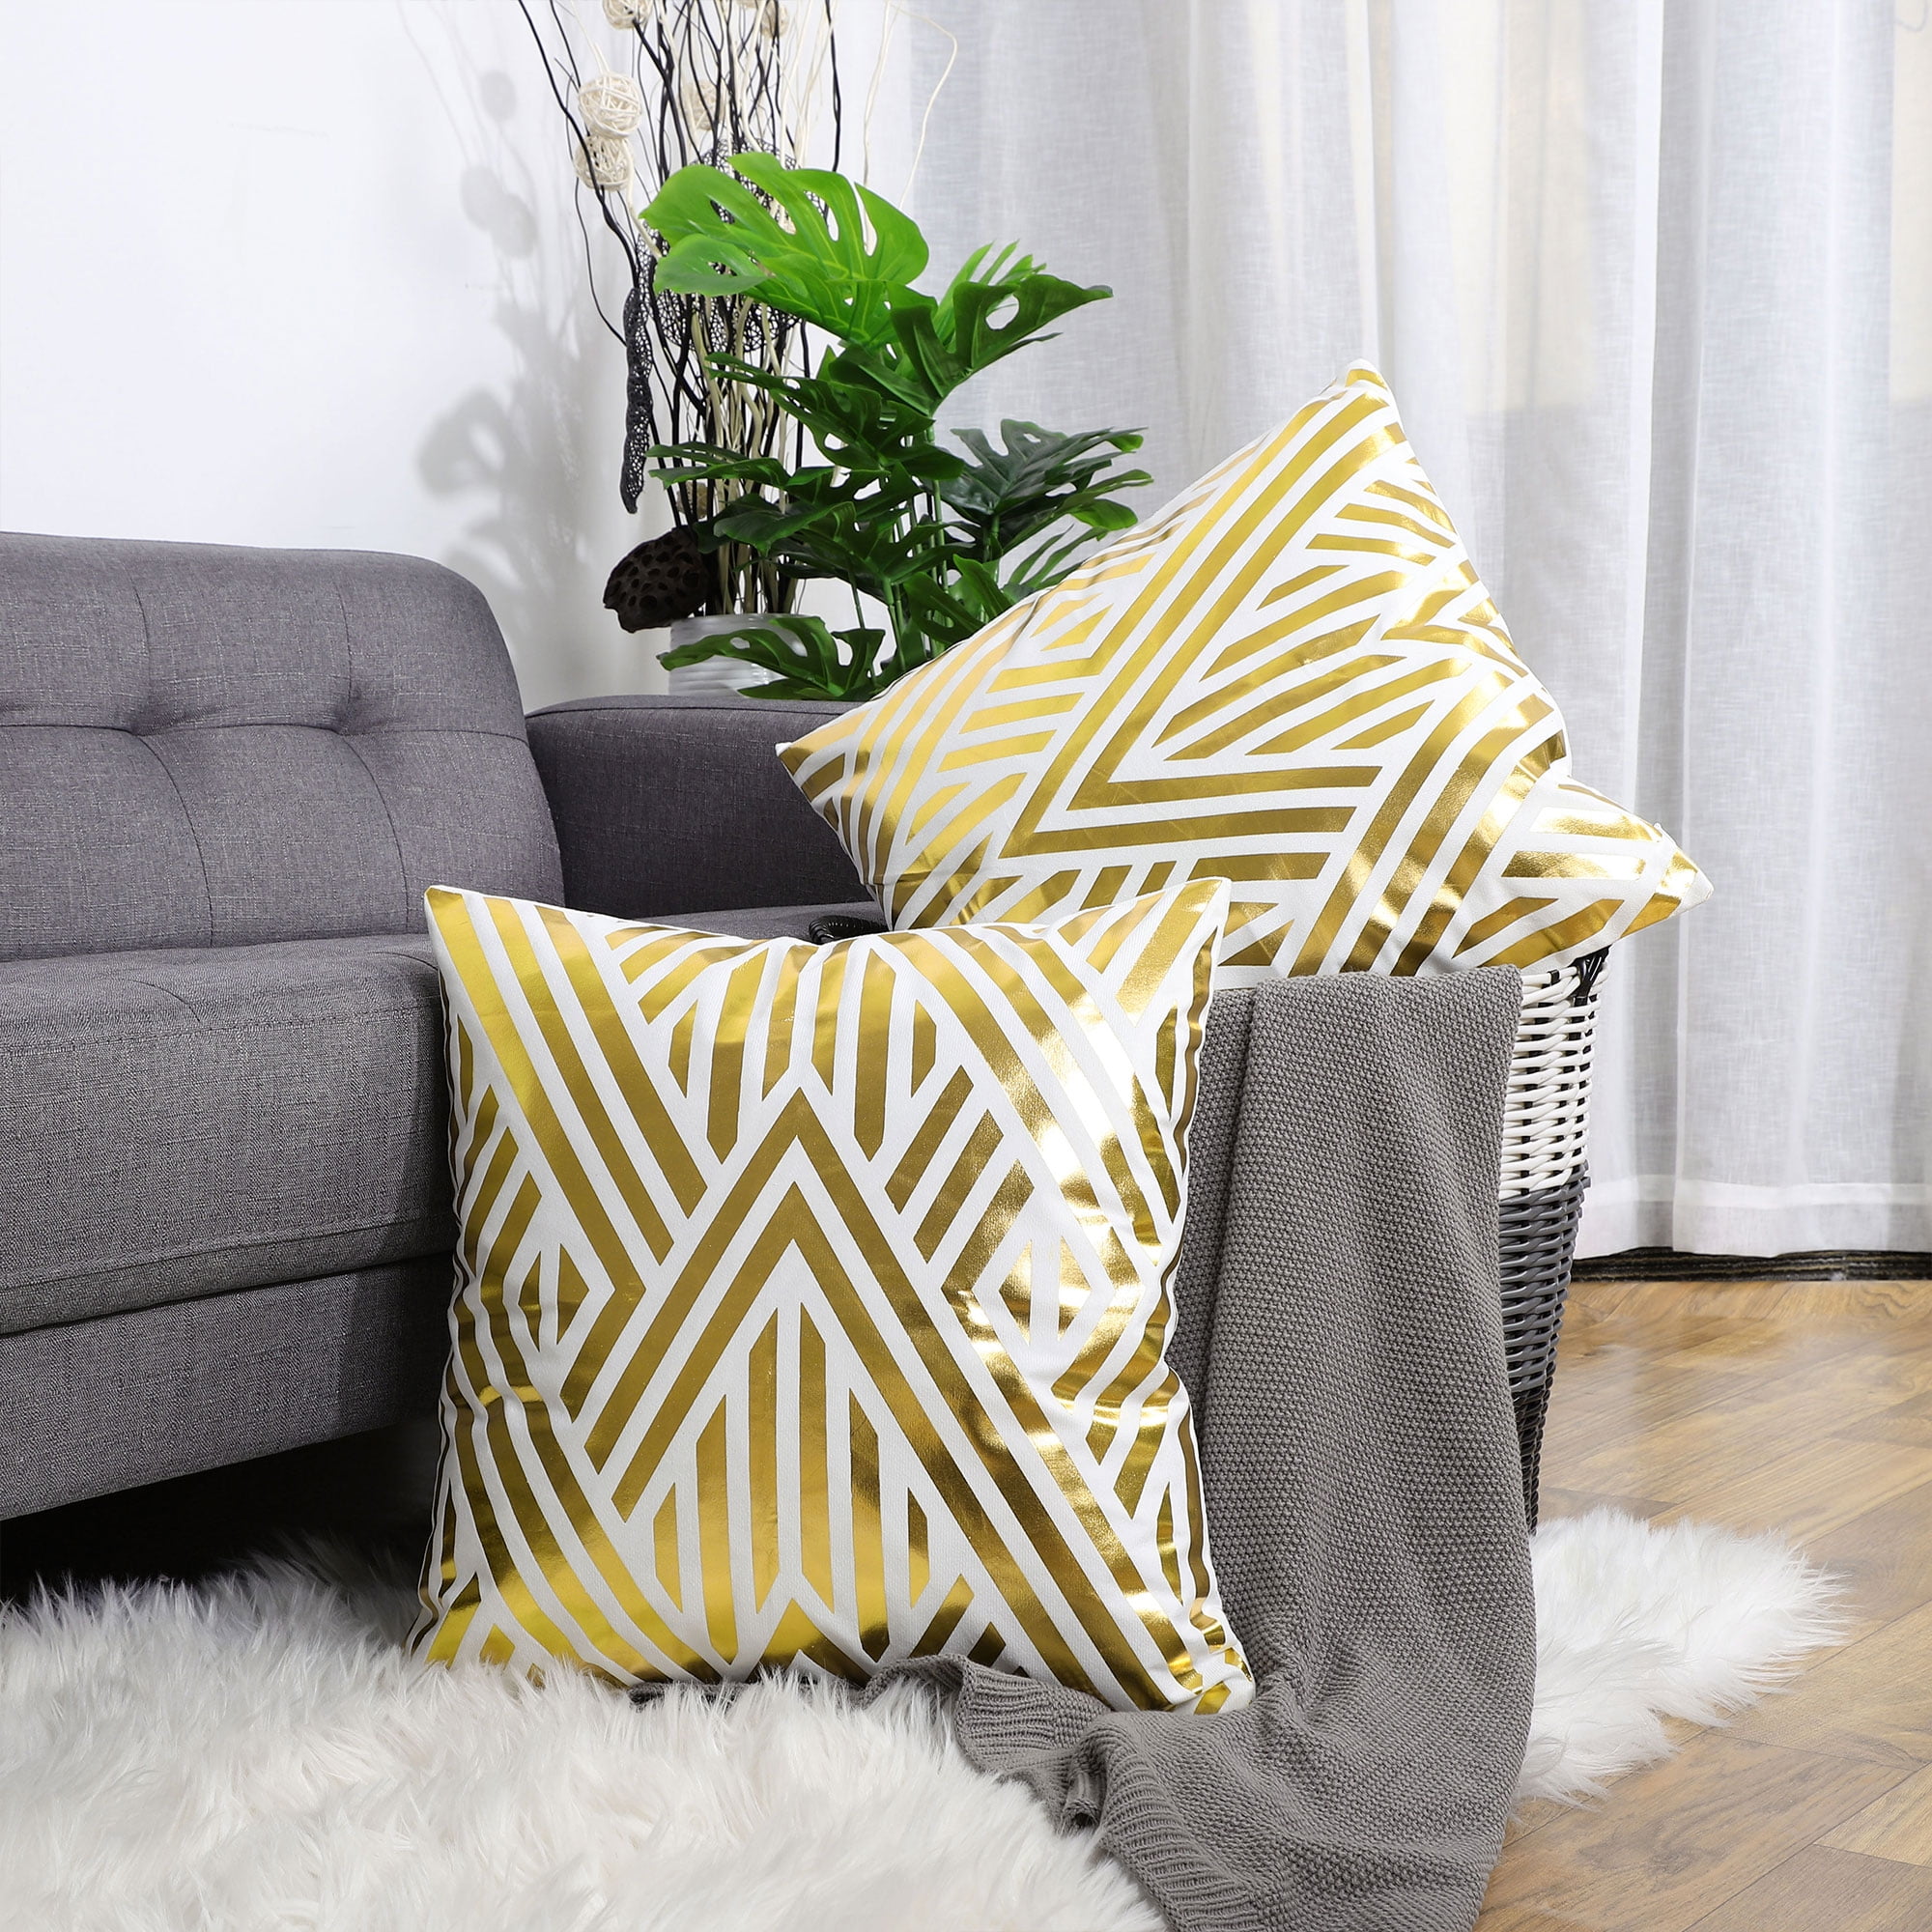 Details about   Art Geometric Pattern Throw Pillow Cases Square Cushion Cover Sofa Home Decor 